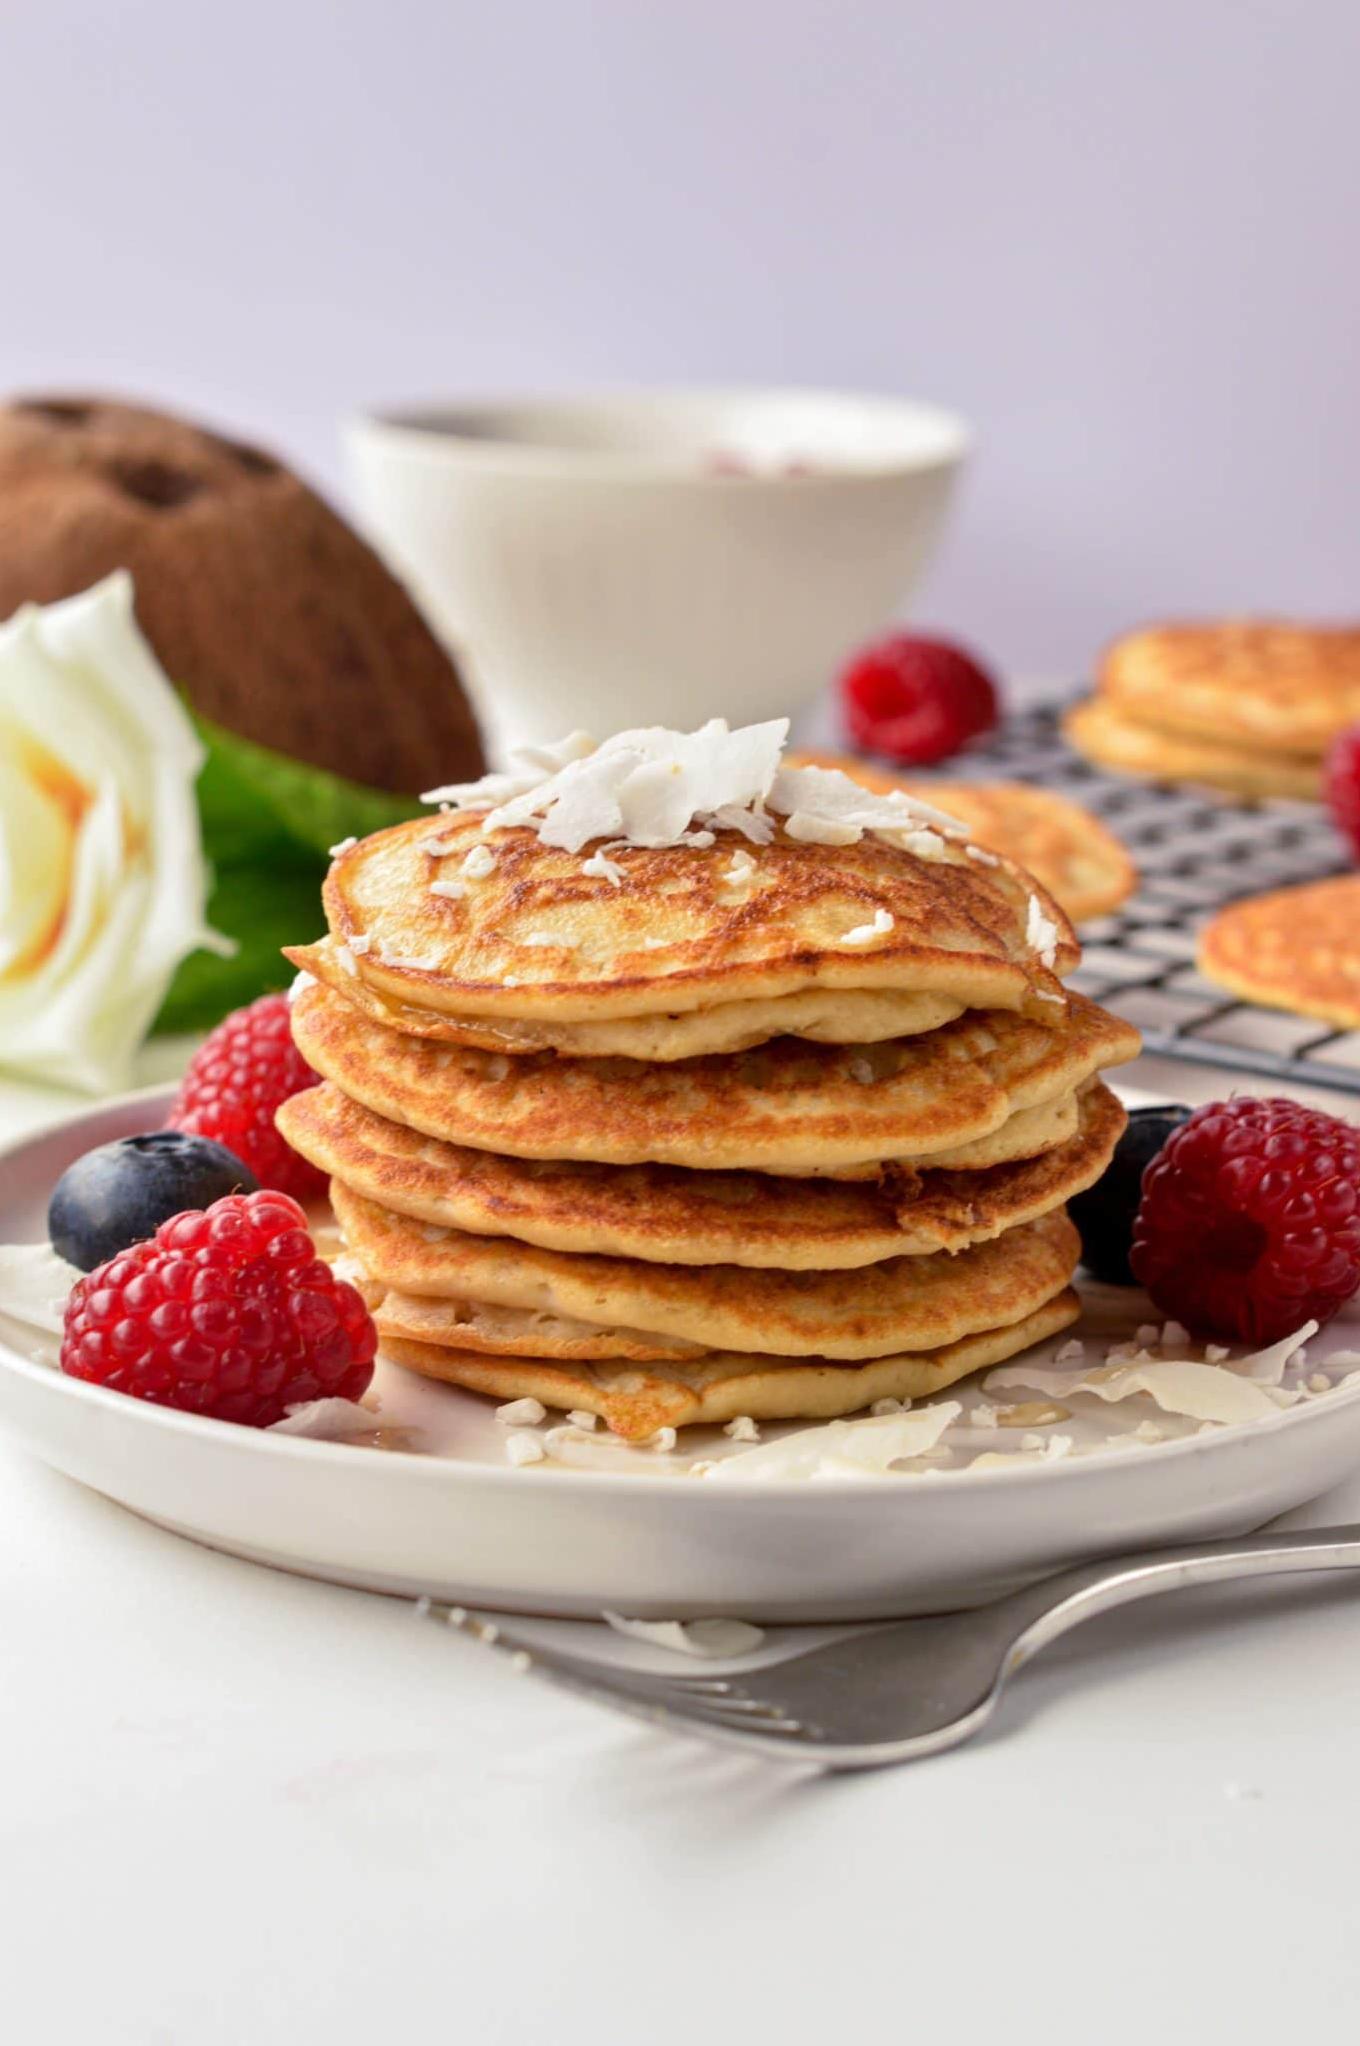  Say goodbye to gluten and try these coconut pancakes instead